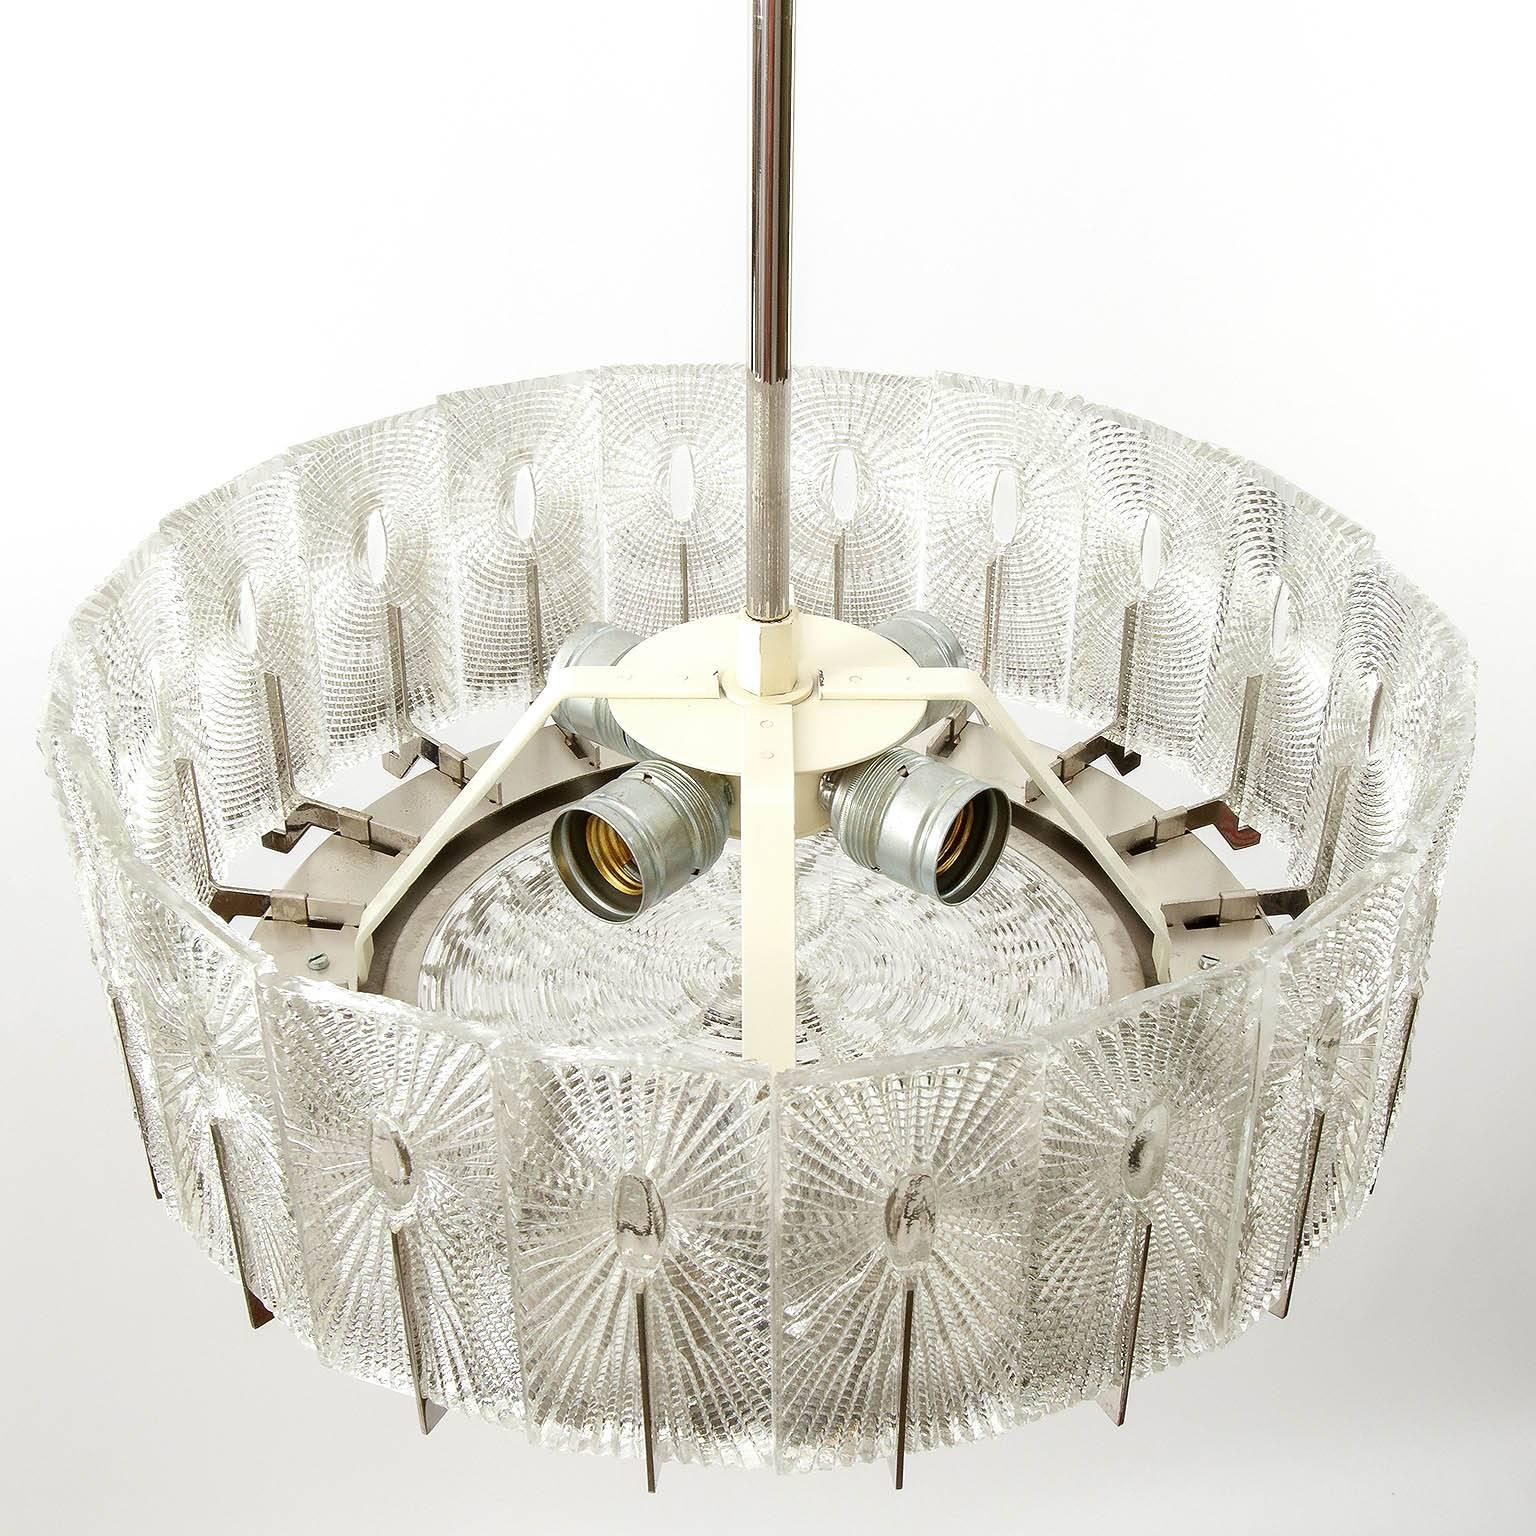 Mid-20th Century Pair of Chandeliers or Flush Mount Lights by Rupert Nikoll, Glass Nickel, 1950s